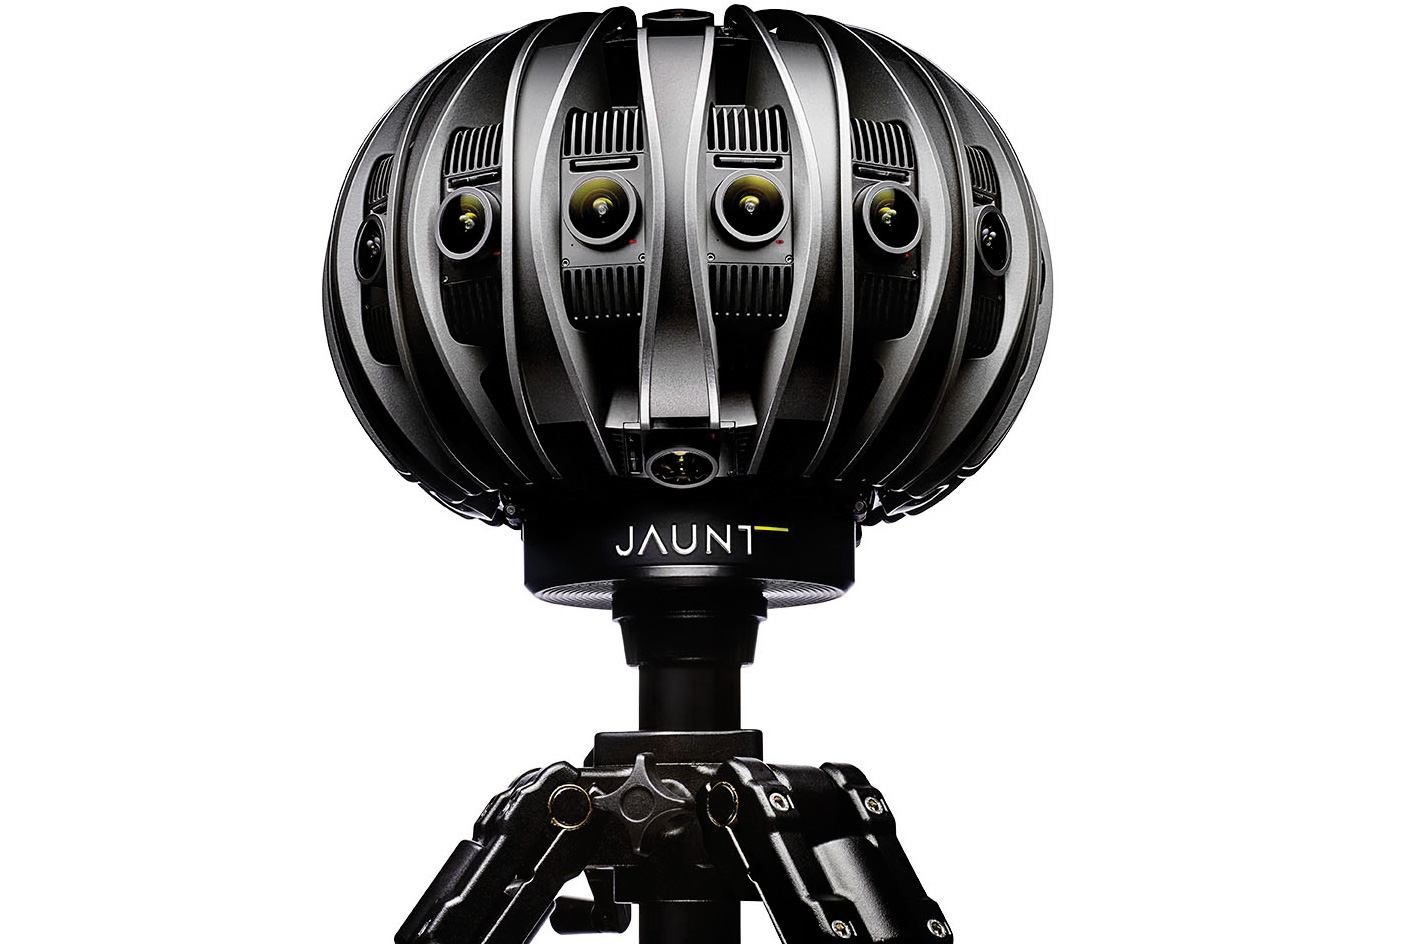 Jaunt ONE, the first professional-grade stereographic cinematic VR camera built from the ground up, features custom optics and high-quality, 360-degree capture. 